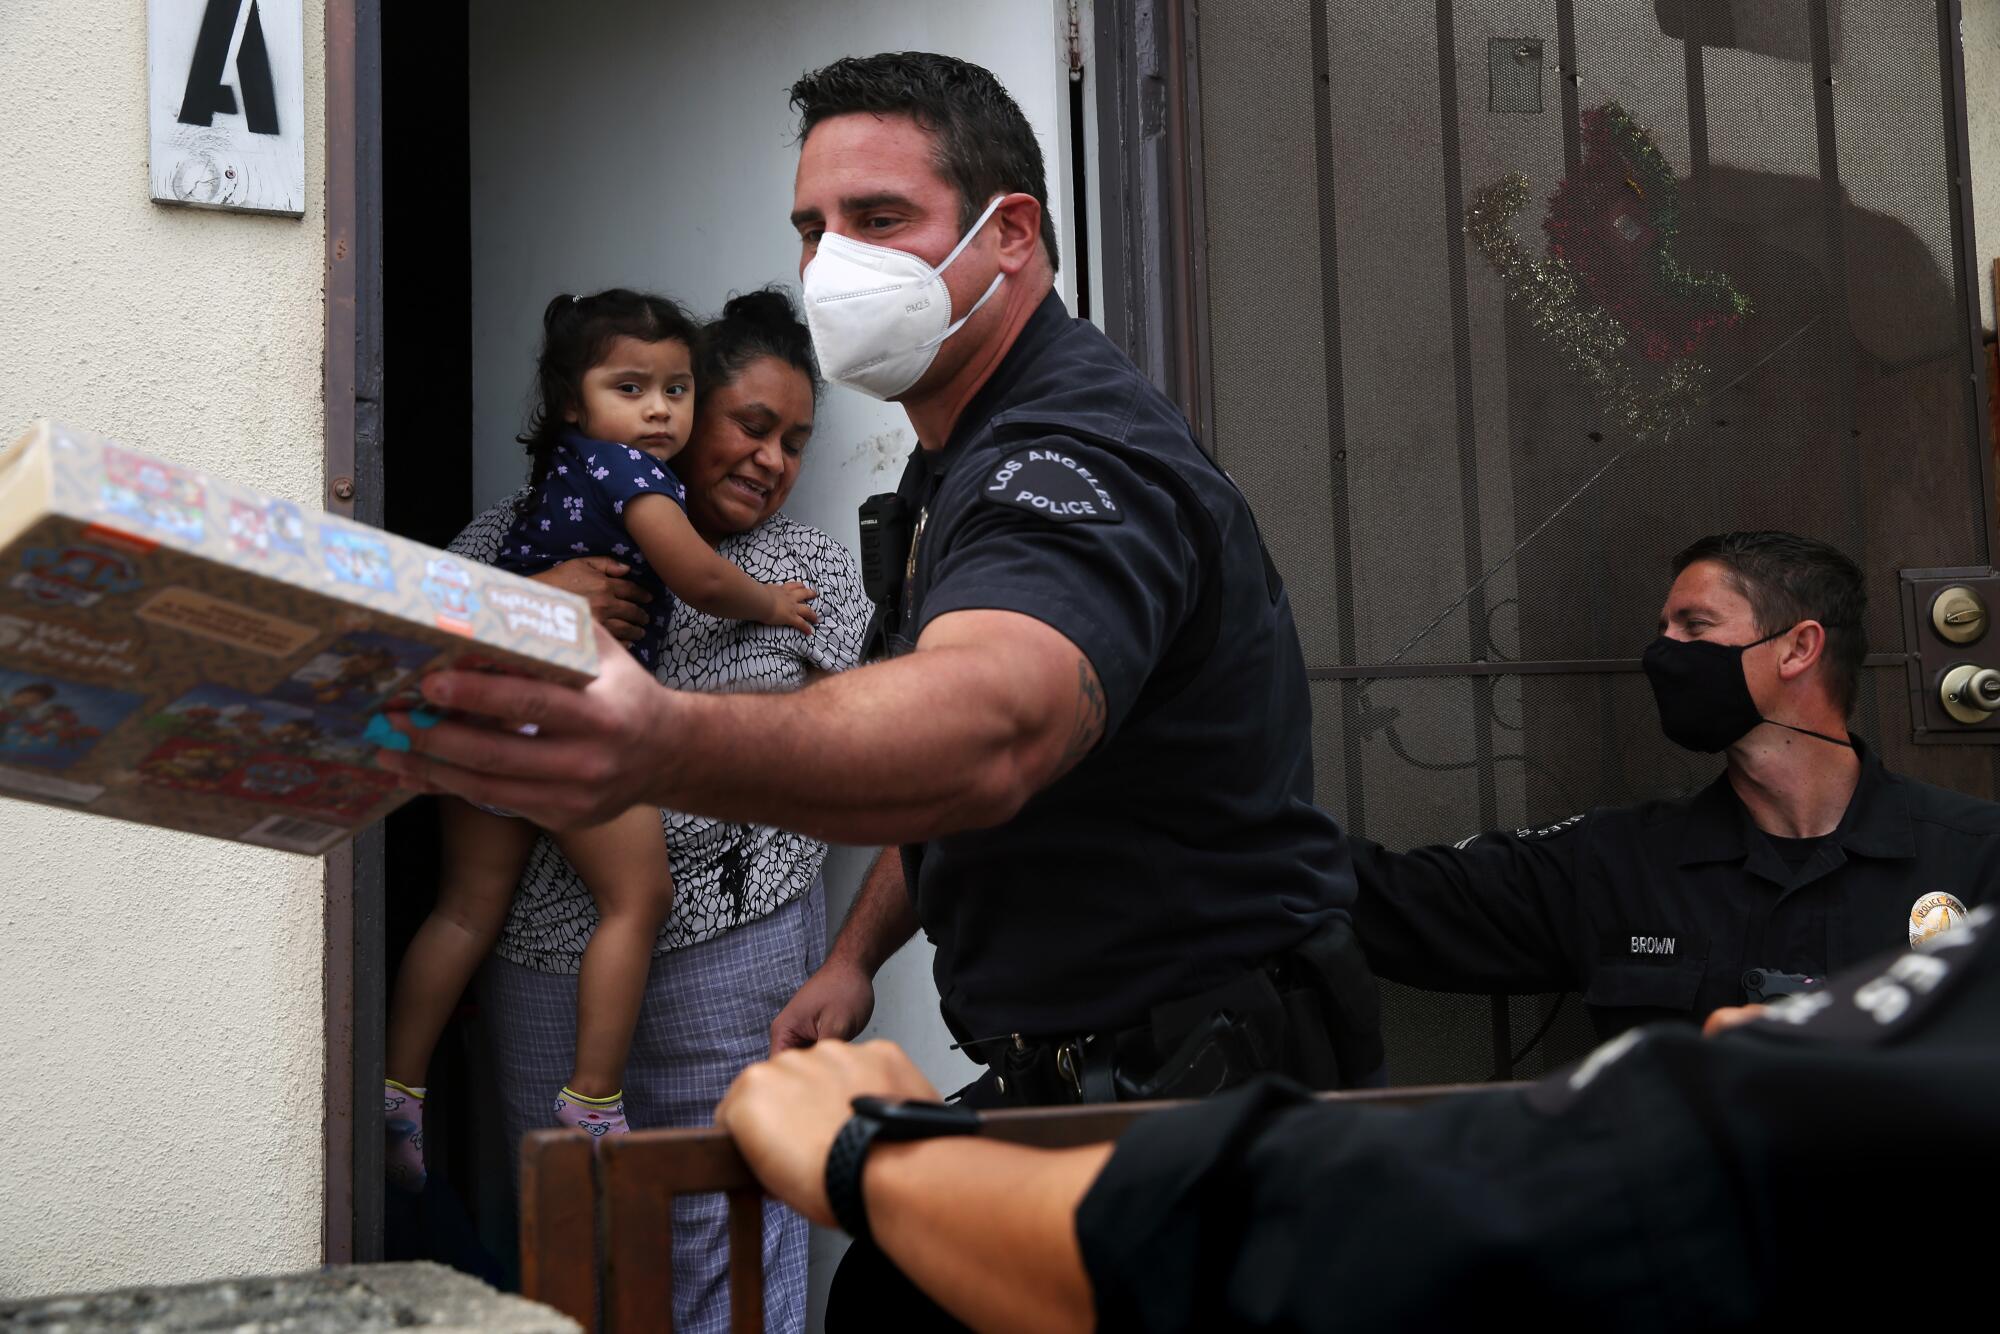 Los Angeles Police Officer Nick Ferara, center, with Officer Dan Brown, right, gives Victoria Taboada a game for her 3-year-old daughter in San Pedro